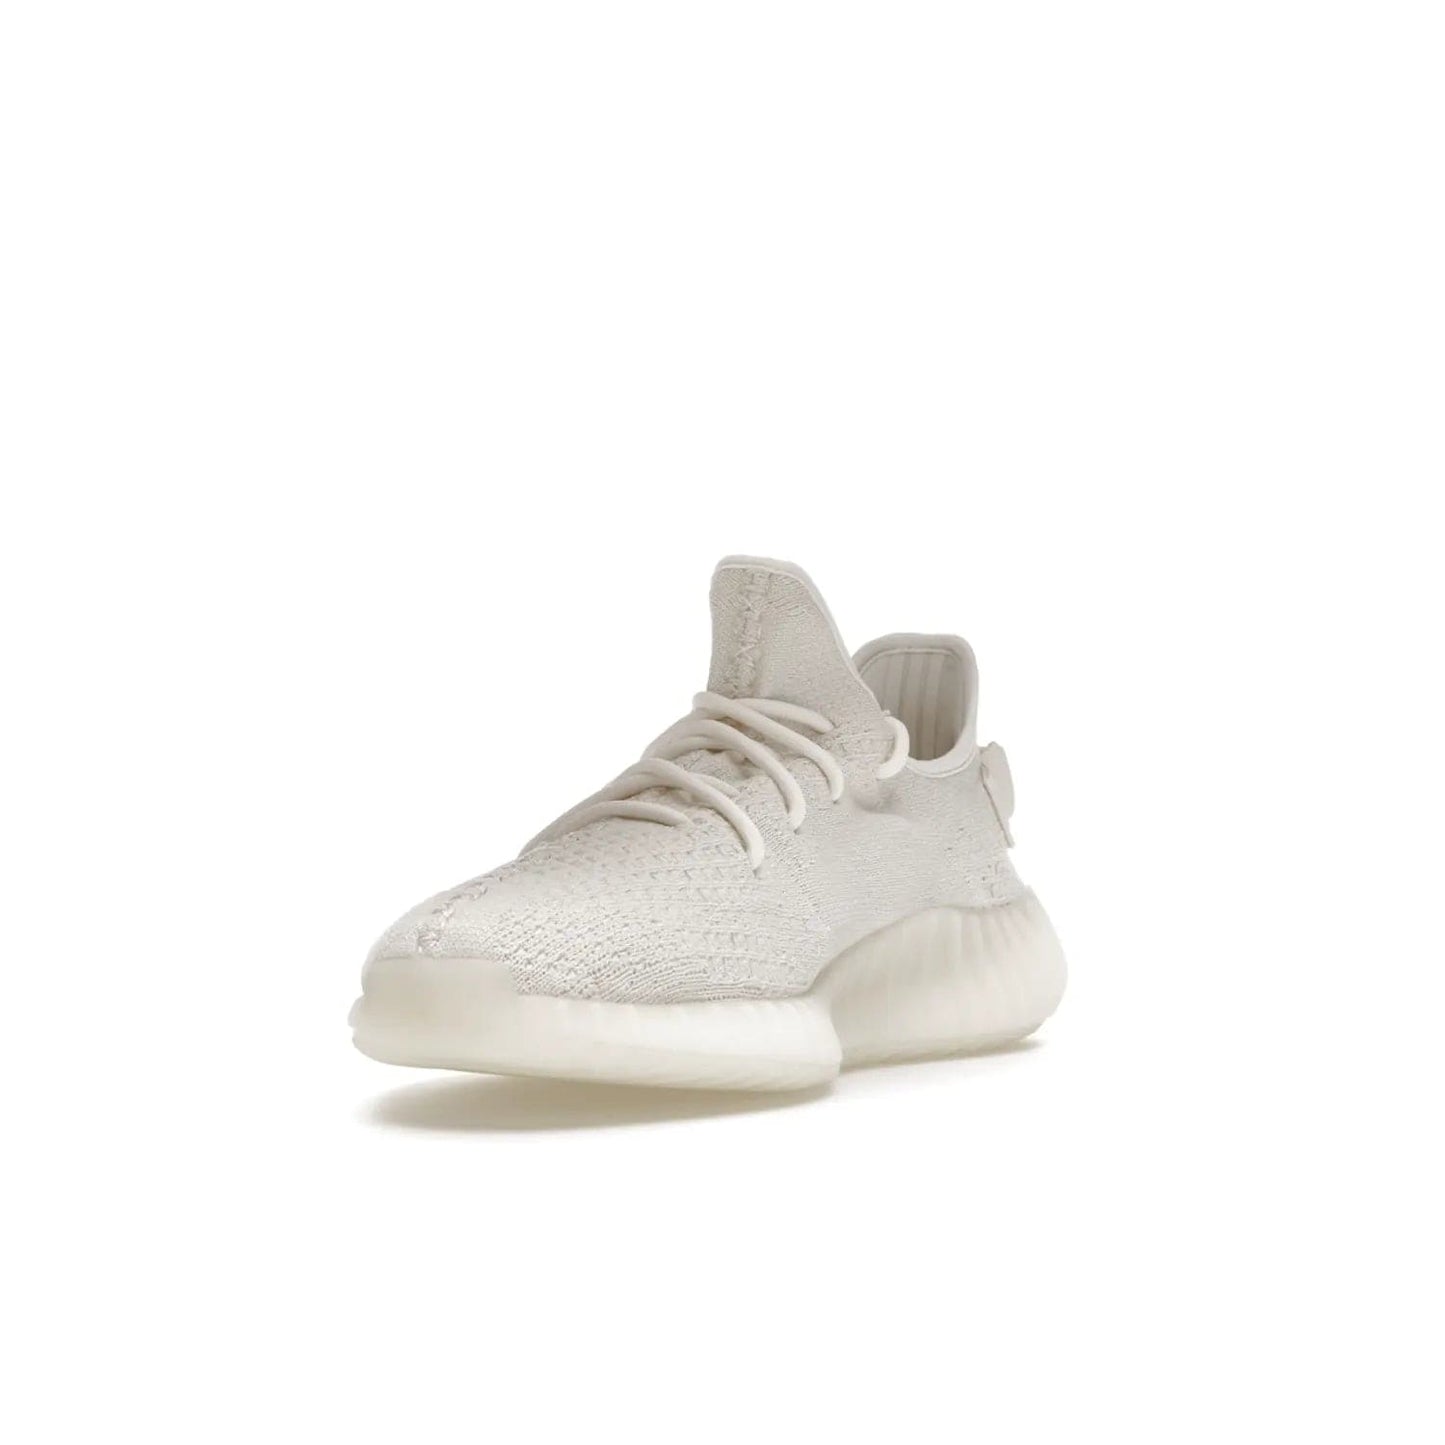 adidas Yeezy Boost 350 V2 Bone - Image 13 - Only at www.BallersClubKickz.com - Grab the stylish and comfortable adidas Yeezy Boost 350 V2 Bone in March 2022. This sneaker features a triple white Primeknit upper, mesh side stripes and canvas heel tabs, sitting atop a semi-translucent sole with Boost technology. Sure to keep your feet comfortable and stylish!